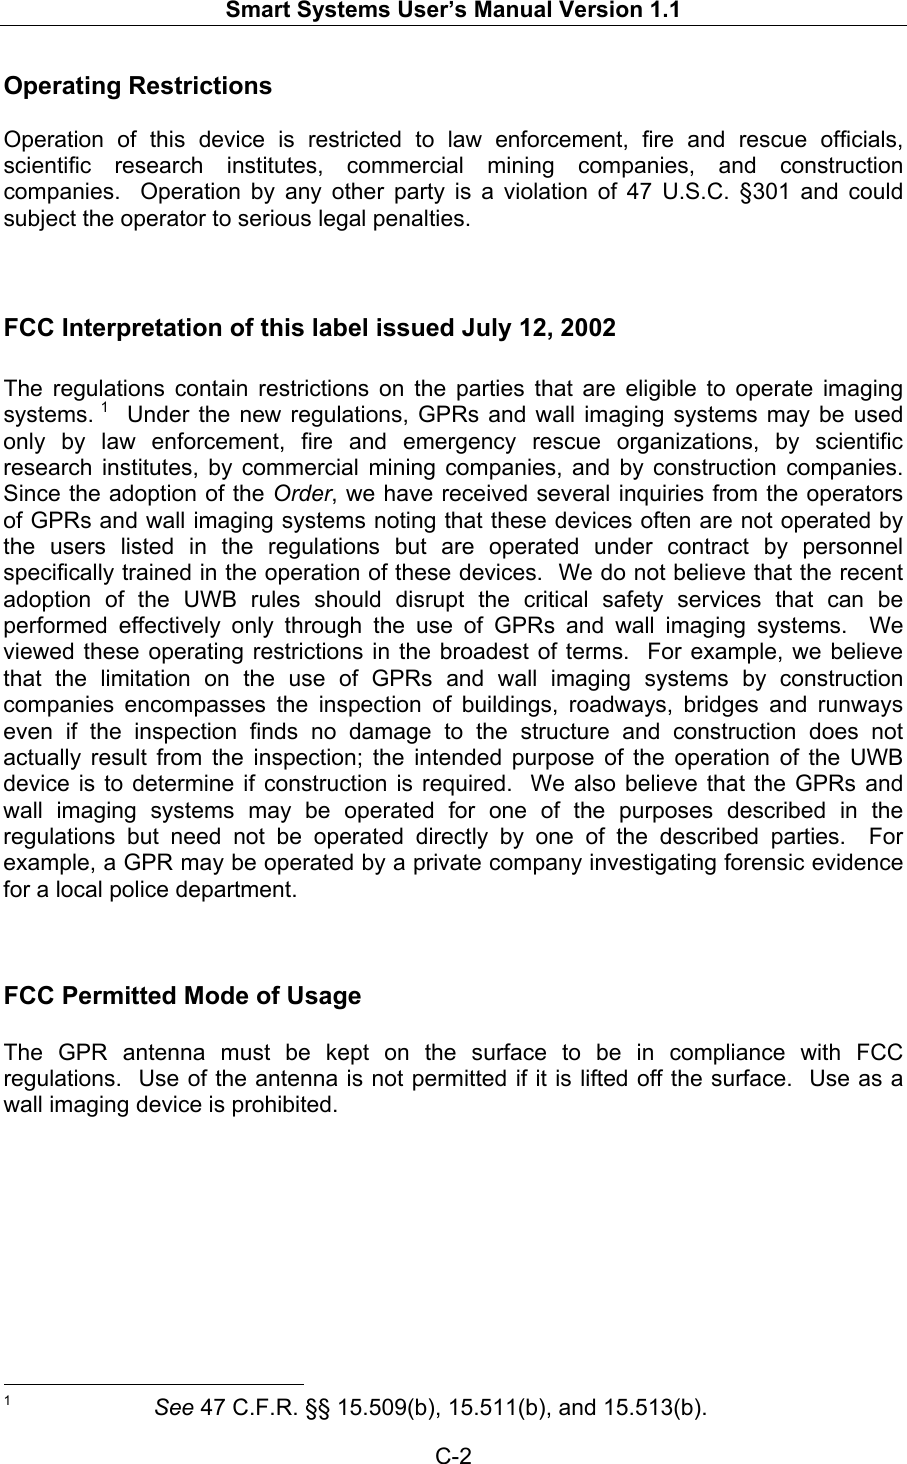   Smart Systems User’s Manual Version 1.1  C-2  Operating Restrictions  Operation of this device is restricted to law enforcement, fire and rescue officials, scientific research institutes, commercial mining companies, and construction companies.  Operation by any other party is a violation of 47 U.S.C. §301 and could subject the operator to serious legal penalties.     FCC Interpretation of this label issued July 12, 2002  The regulations contain restrictions on the parties that are eligible to operate imaging systems. 1  Under the new regulations, GPRs and wall imaging systems may be used only by law enforcement, fire and emergency rescue organizations, by scientific research institutes, by commercial mining companies, and by construction companies.  Since the adoption of the Order, we have received several inquiries from the operators of GPRs and wall imaging systems noting that these devices often are not operated by the users listed in the regulations but are operated under contract by personnel specifically trained in the operation of these devices.  We do not believe that the recent adoption of the UWB rules should disrupt the critical safety services that can be performed effectively only through the use of GPRs and wall imaging systems.  We viewed these operating restrictions in the broadest of terms.  For example, we believe that the limitation on the use of GPRs and wall imaging systems by construction companies encompasses the inspection of buildings, roadways, bridges and runways even if the inspection finds no damage to the structure and construction does not actually result from the inspection; the intended purpose of the operation of the UWB device is to determine if construction is required.  We also believe that the GPRs and wall imaging systems may be operated for one of the purposes described in the regulations but need not be operated directly by one of the described parties.  For example, a GPR may be operated by a private company investigating forensic evidence for a local police department.        FCC Permitted Mode of Usage  The GPR antenna must be kept on the surface to be in compliance with FCC regulations.  Use of the antenna is not permitted if it is lifted off the surface.  Use as a wall imaging device is prohibited.                                                           1     See 47 C.F.R. §§ 15.509(b), 15.511(b), and 15.513(b). 